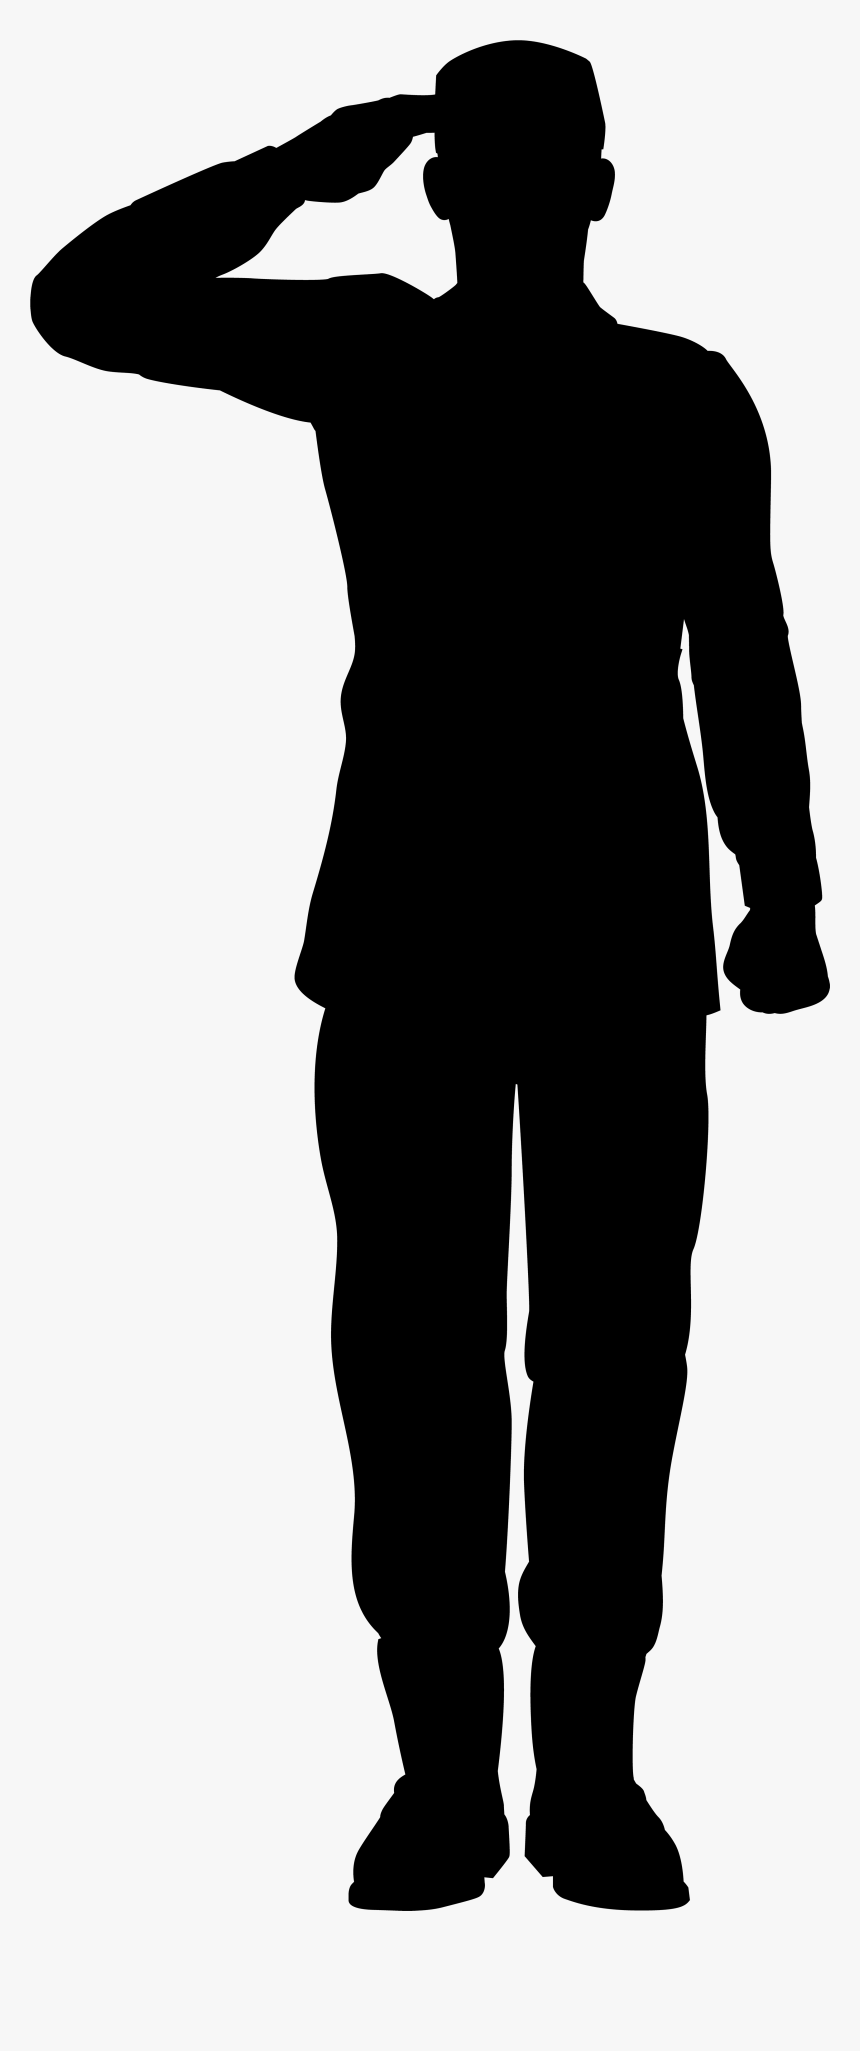 Army Soldier Saluting Silhouette Png Clip Art Image - Soldier Silhouette Png, Transparent Png, Free Download